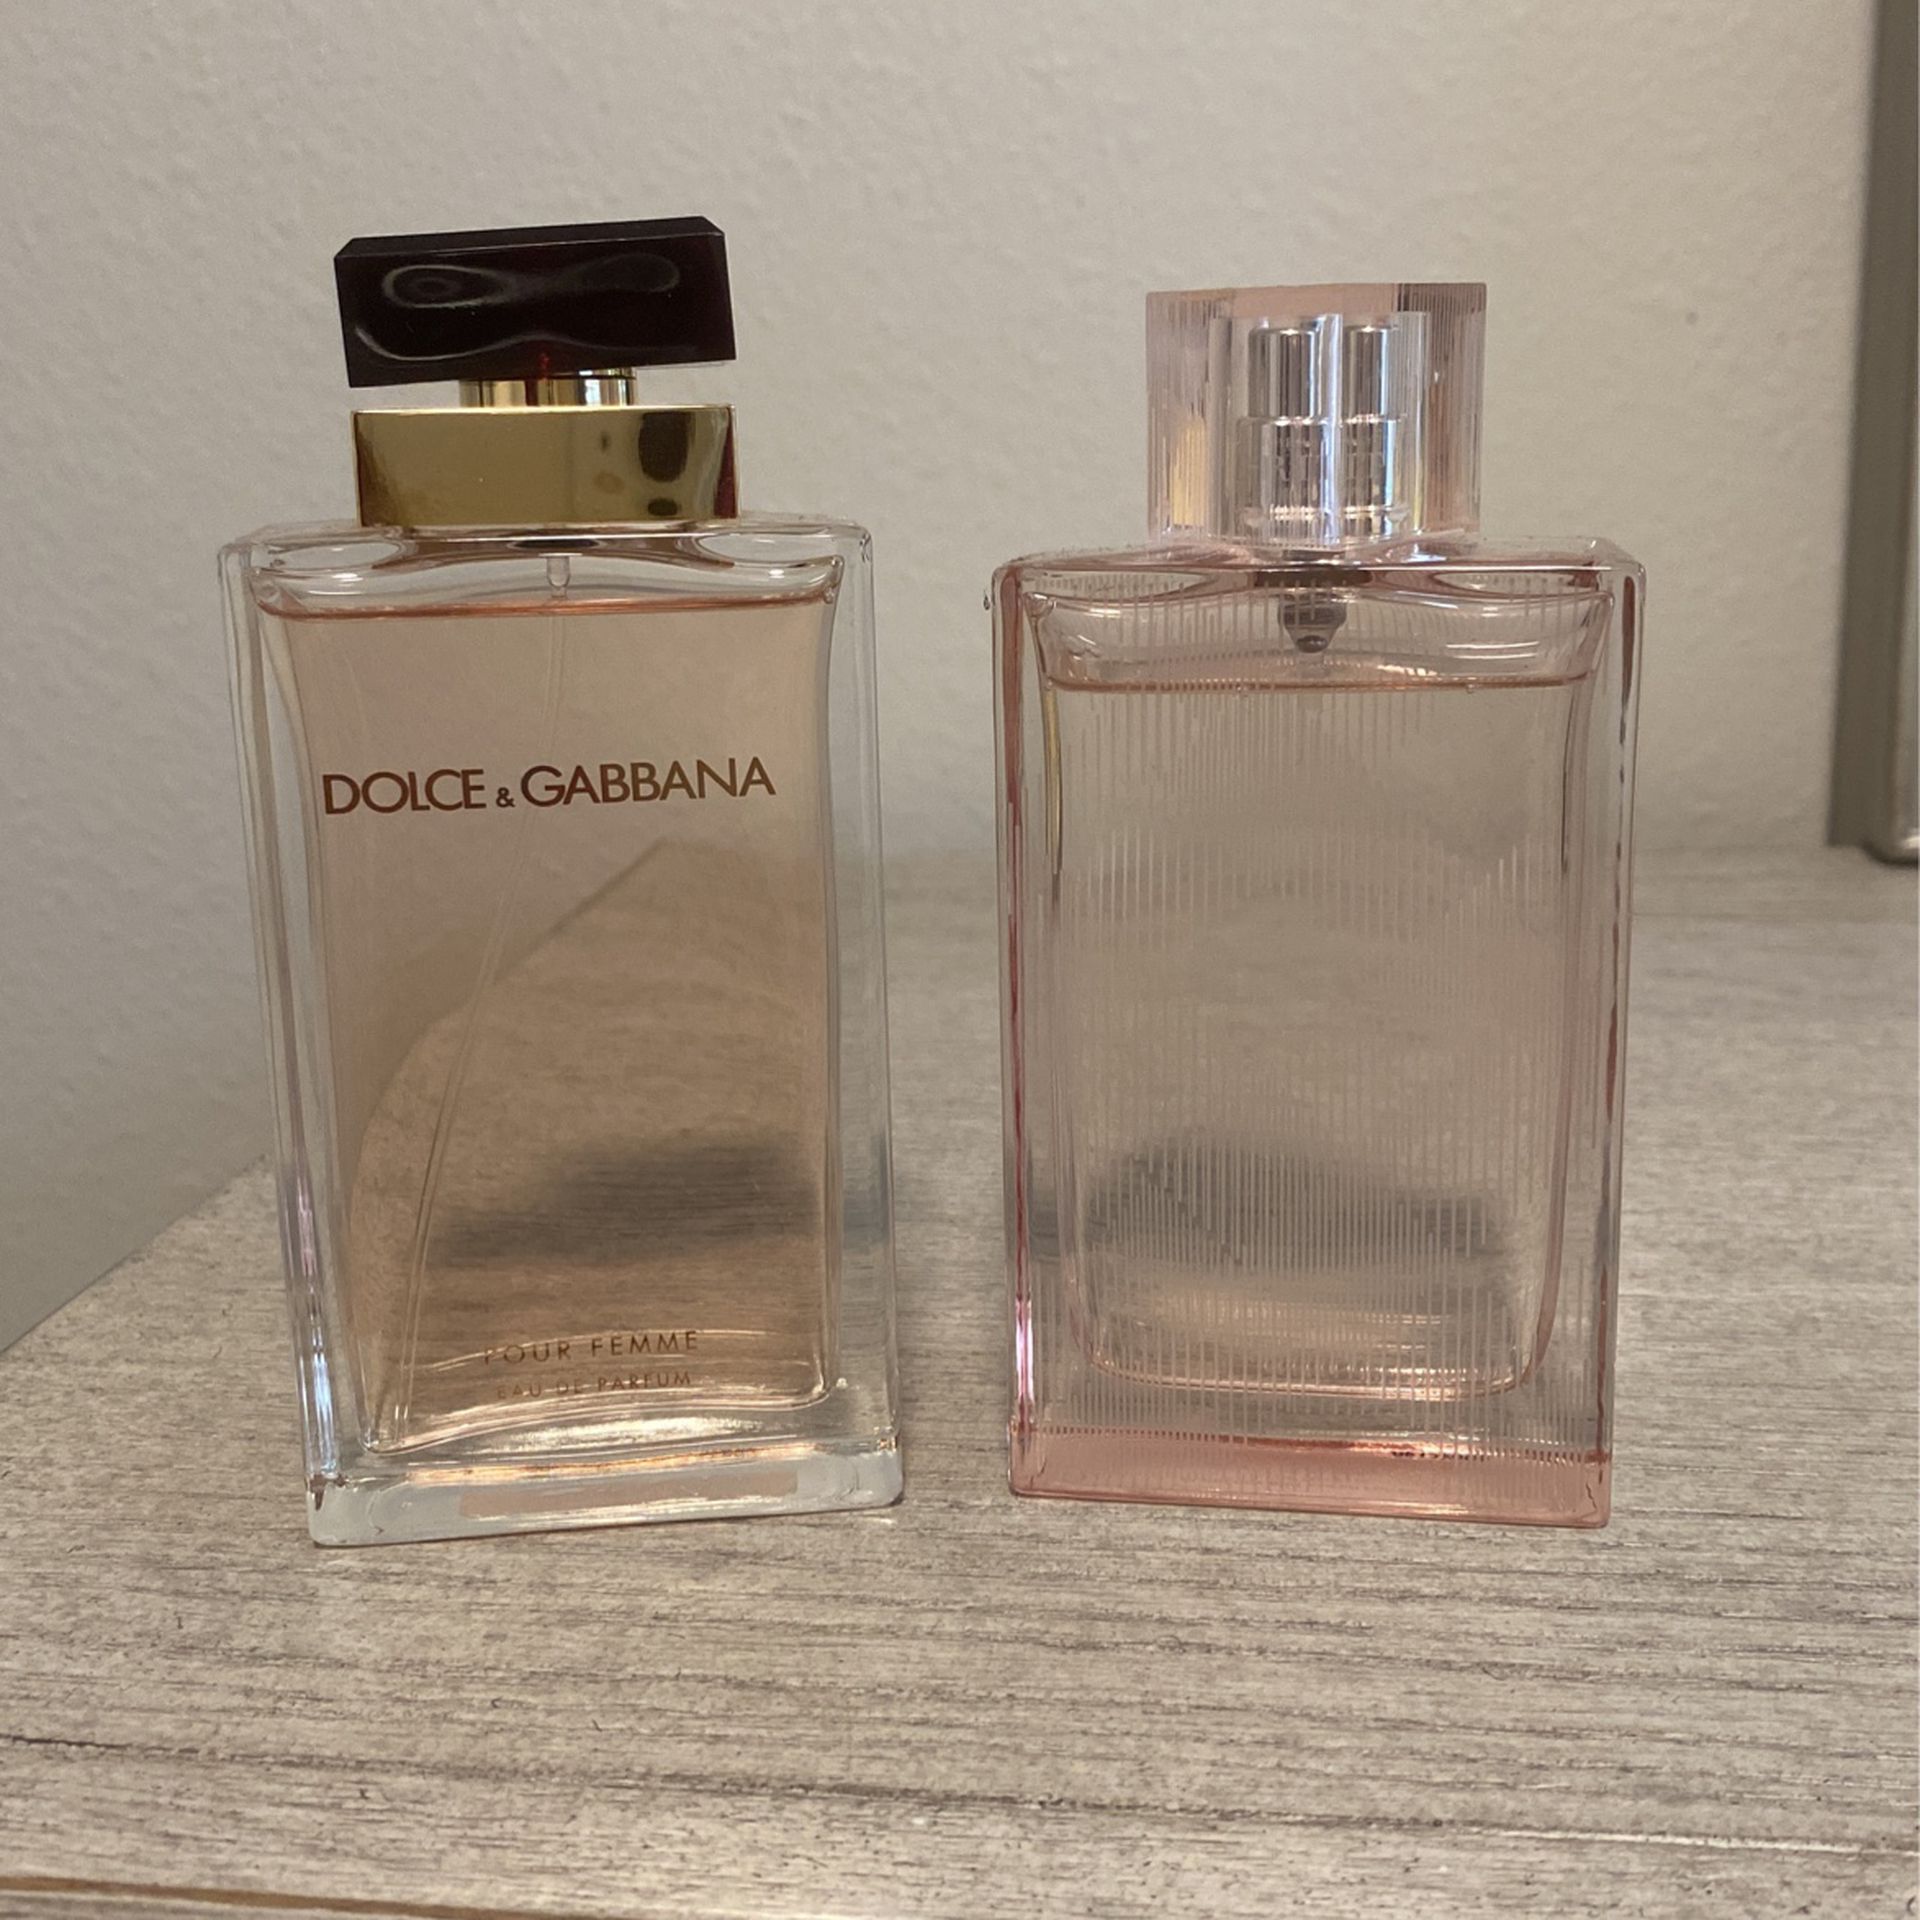 Bundle Of 2 Burberry Brit Sheer For Her EDT 3.3fl and Dolce &Gabbana Pour Femme Edp 3.3fl Oz